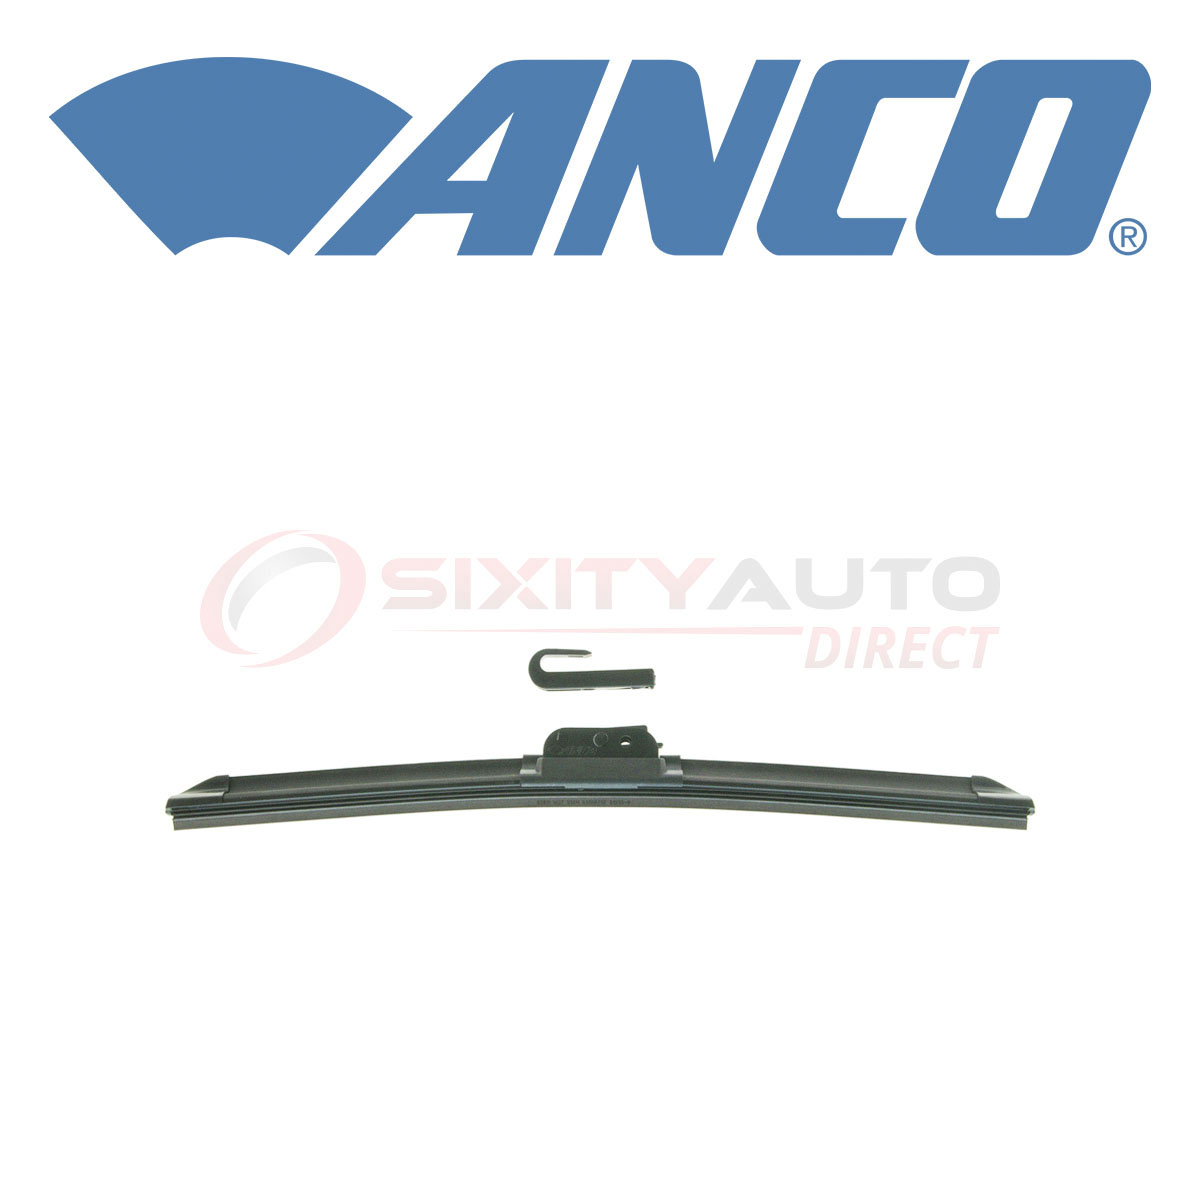 ANCO Countour Windshield Wiper Blade for 2013-2017 Hyundai Santa Fe Sport nz | eBay Hyundai Santa Fe Sport 2017 Windshield Wipers